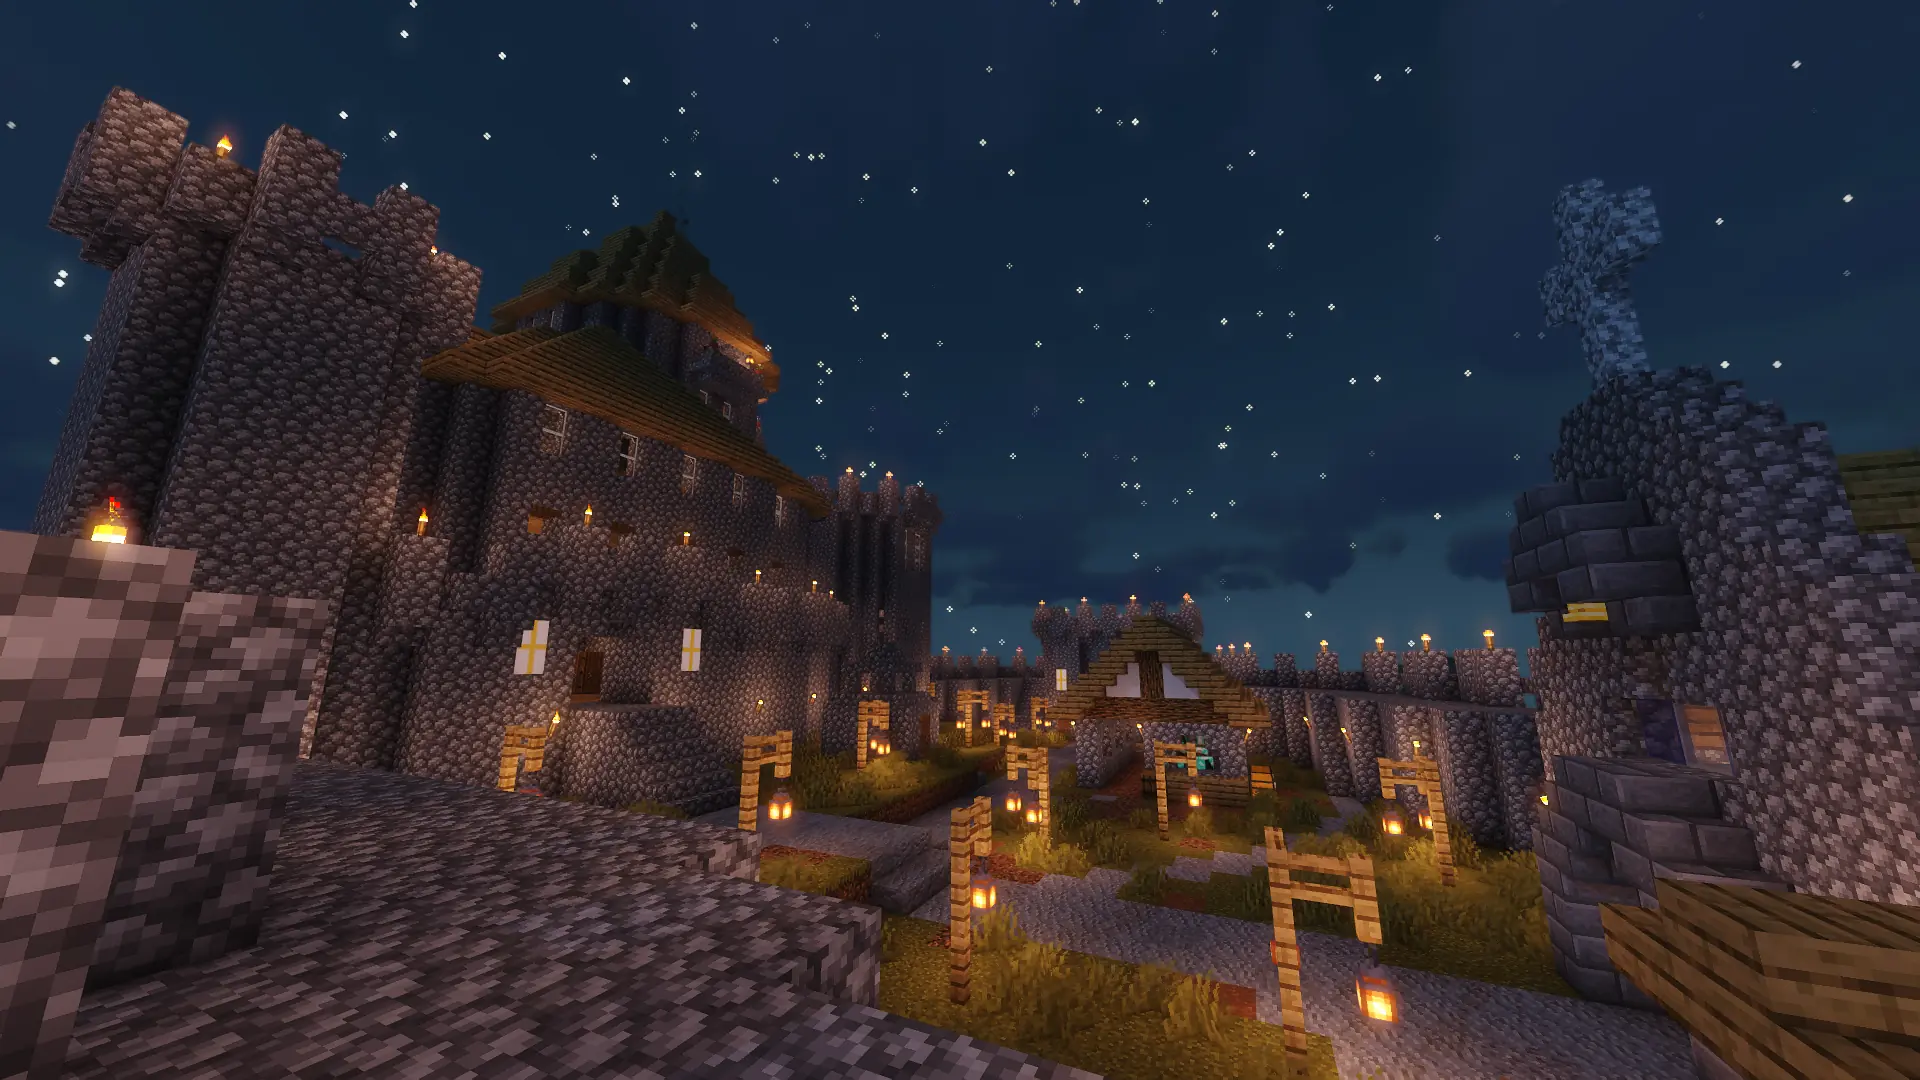 The castle's courtyard at night